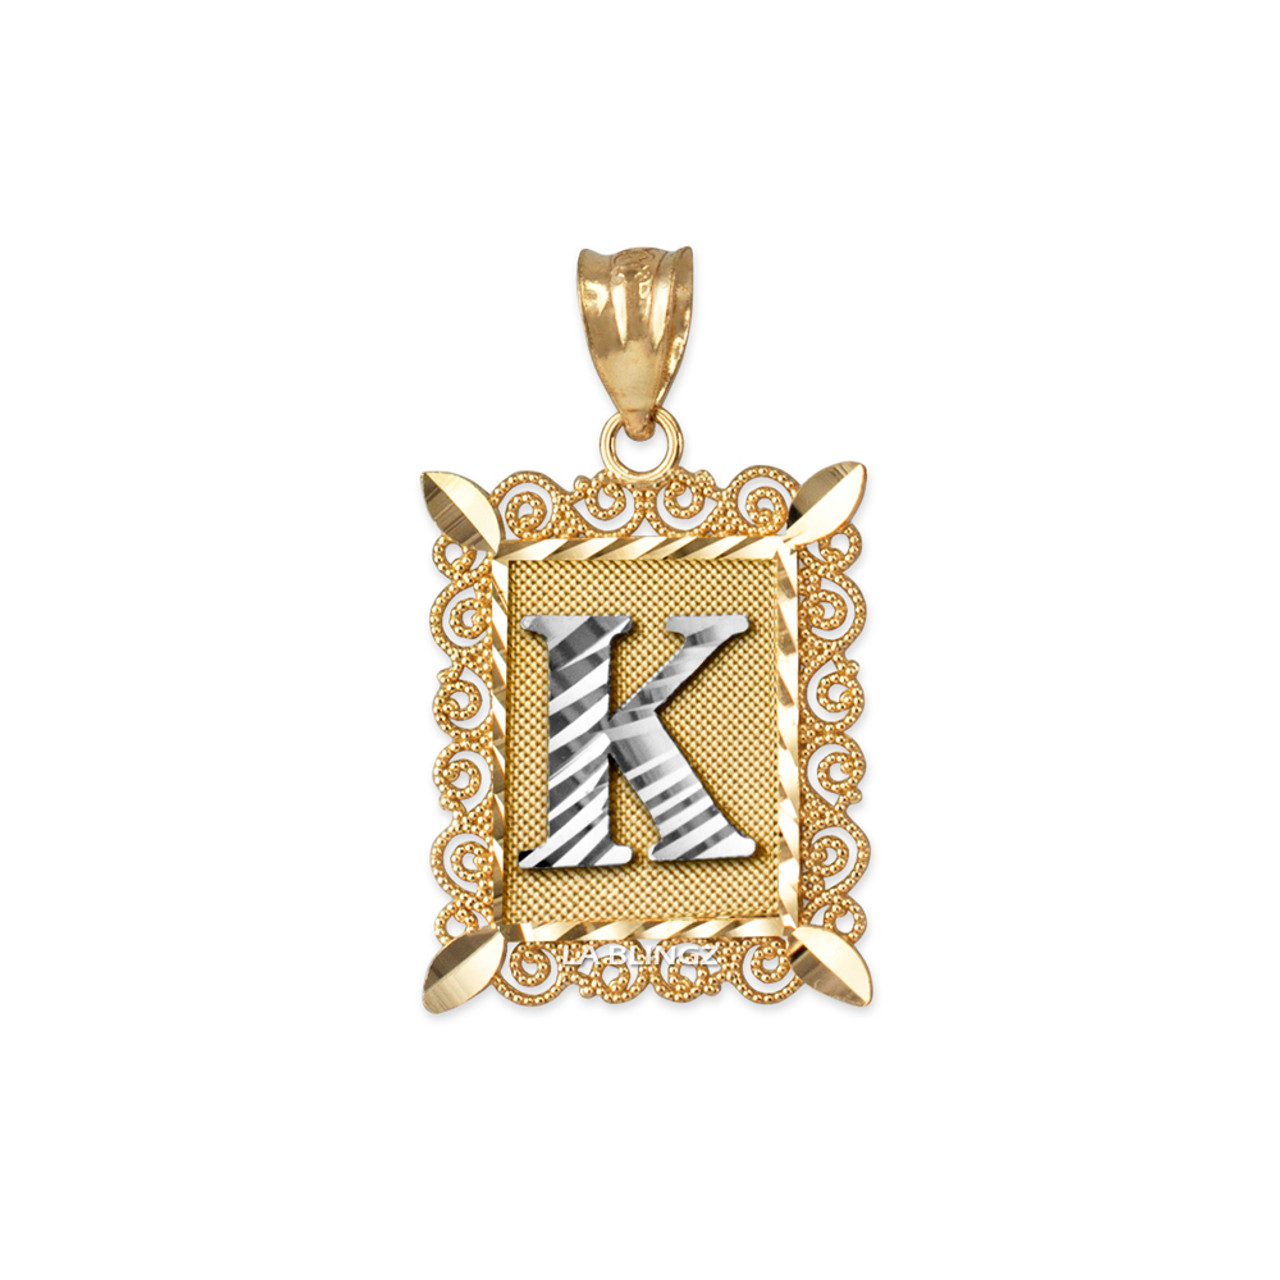 Buy K Initial Diamond Gold Pendant Necklace / Solid 14K Rose Gold / Letter  K Pendant and Chain Necklace / 16.5long Online in India - Etsy